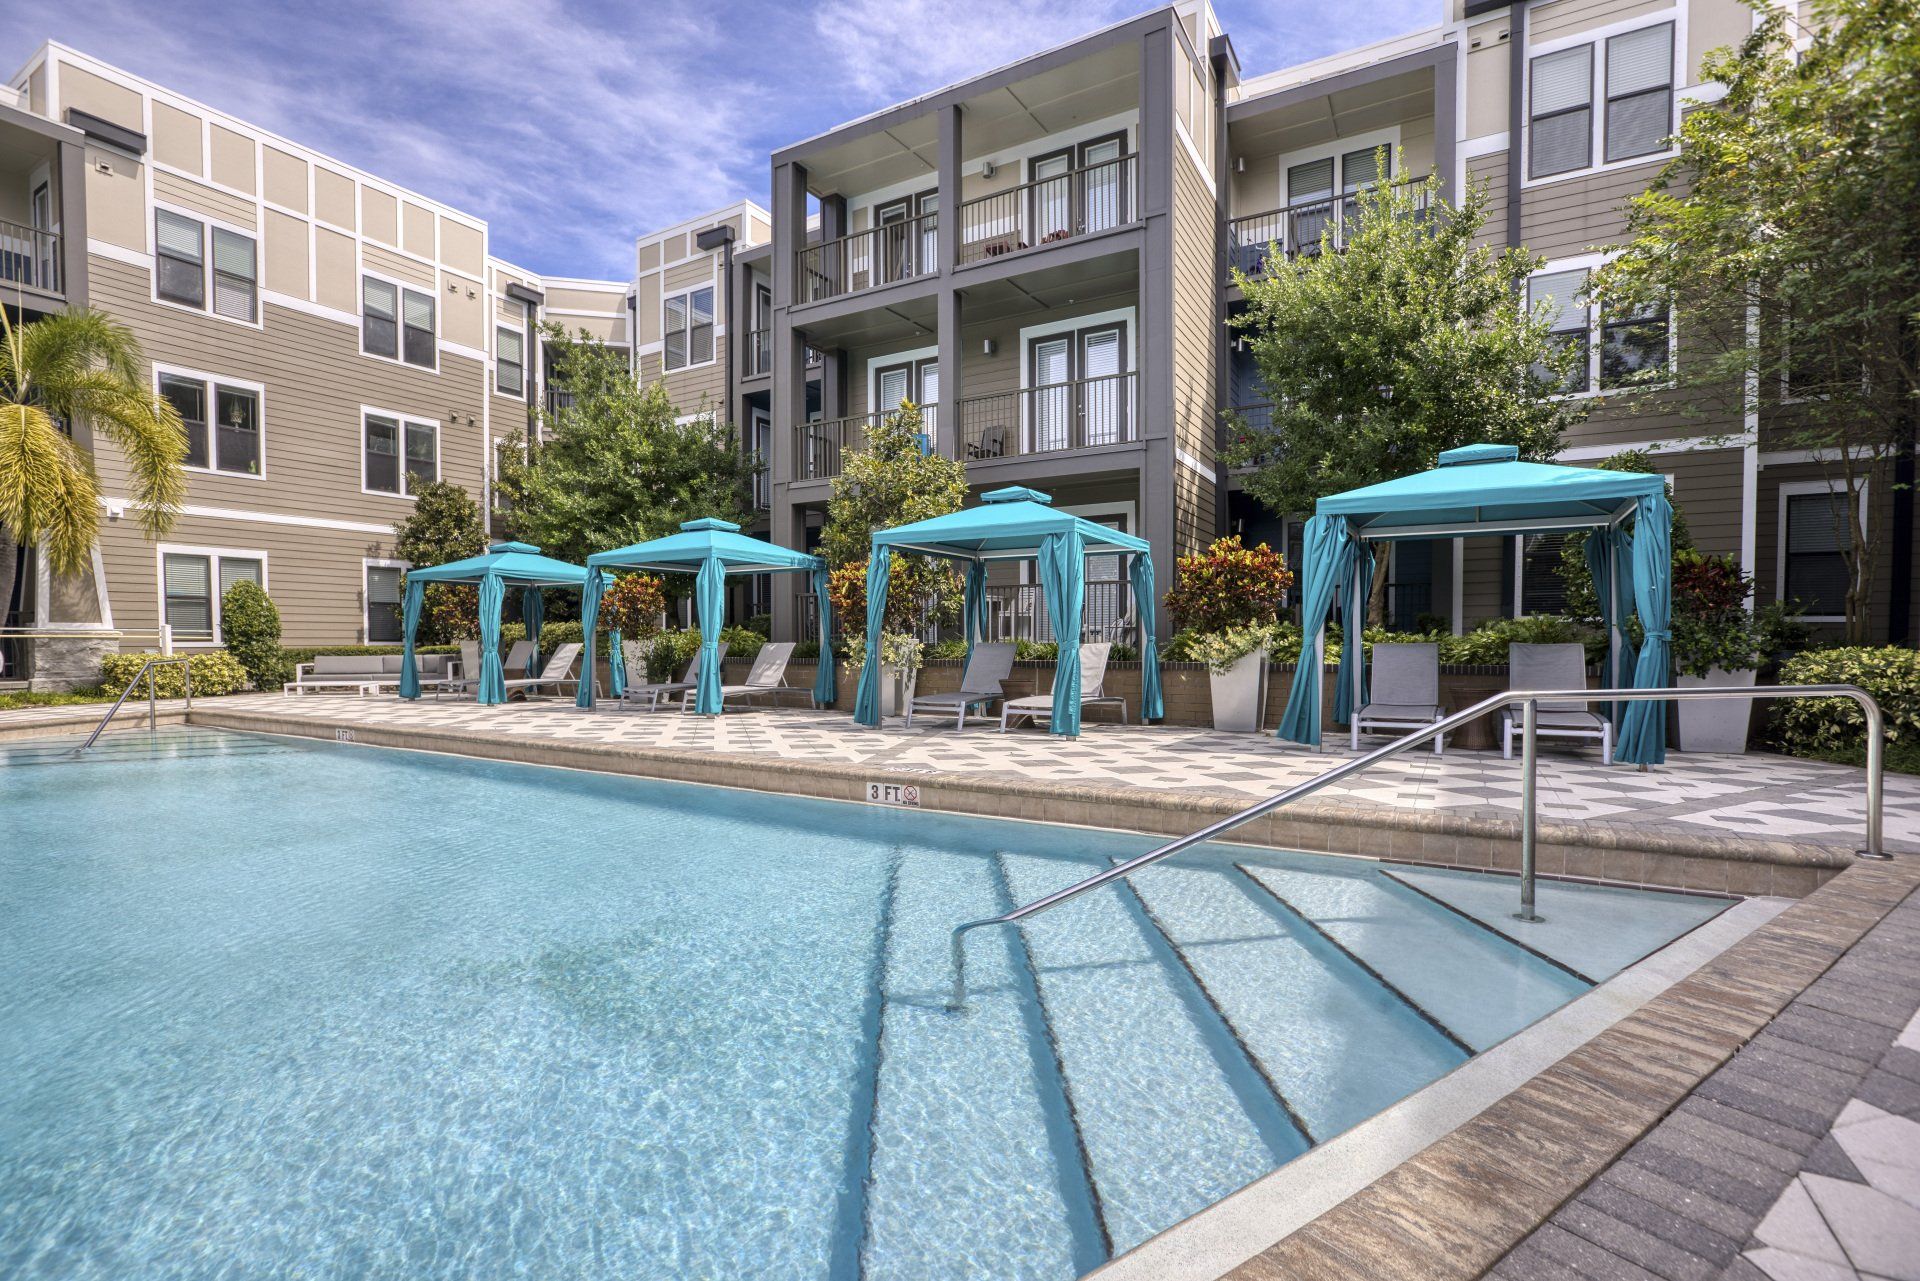 pool and lounge area with umbrellas at NoHo Flats